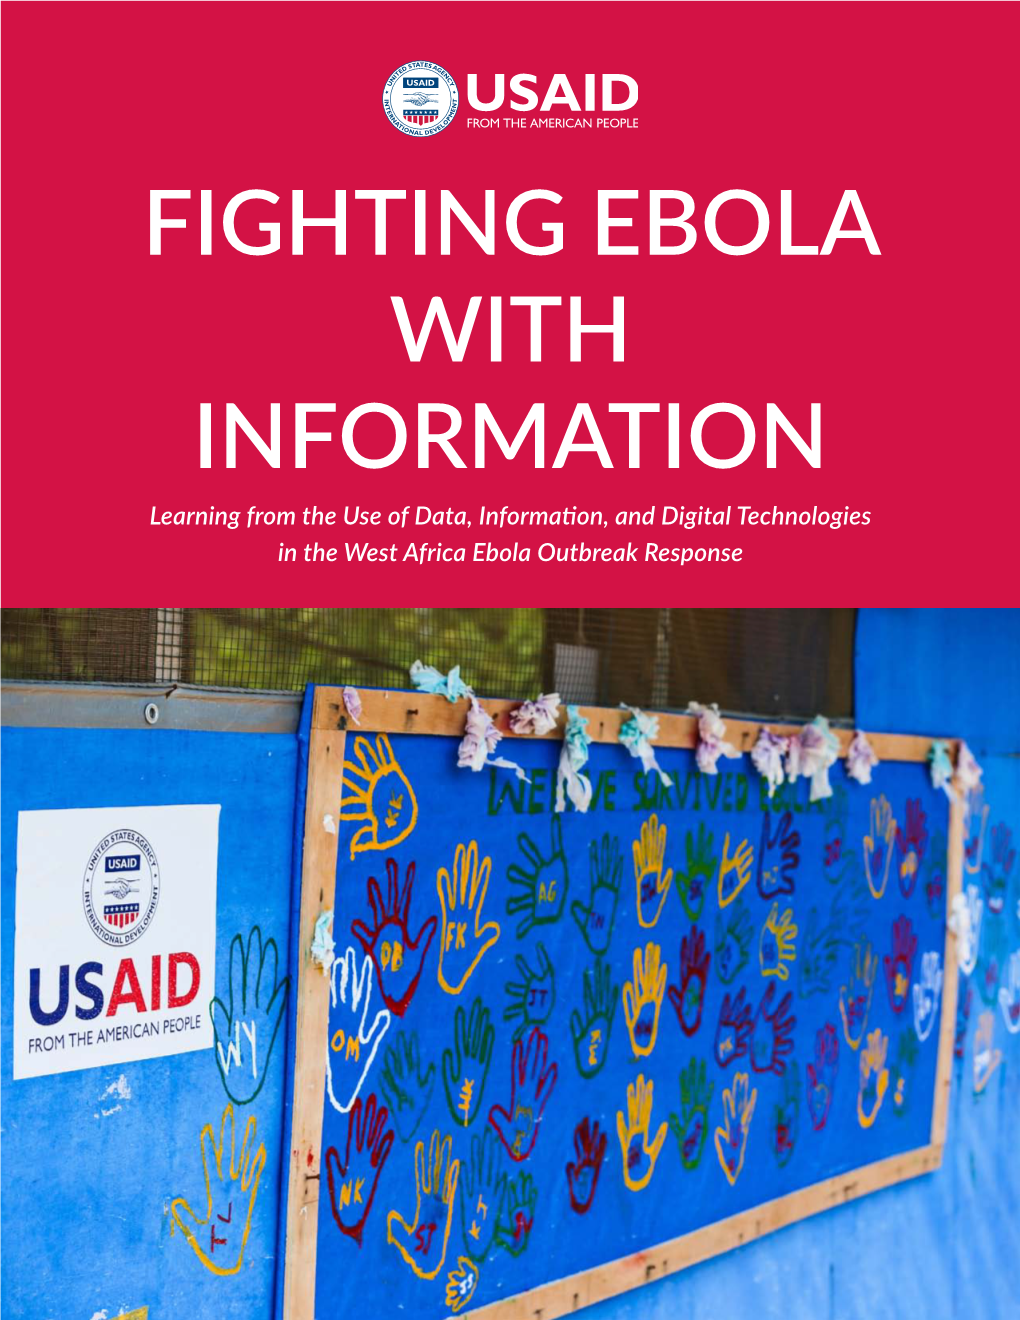 FIGHTING EBOLA with INFORMATION Learning from the Use of Data, Information, and Digital Technologies in the West Africa Ebola Outbreak Response